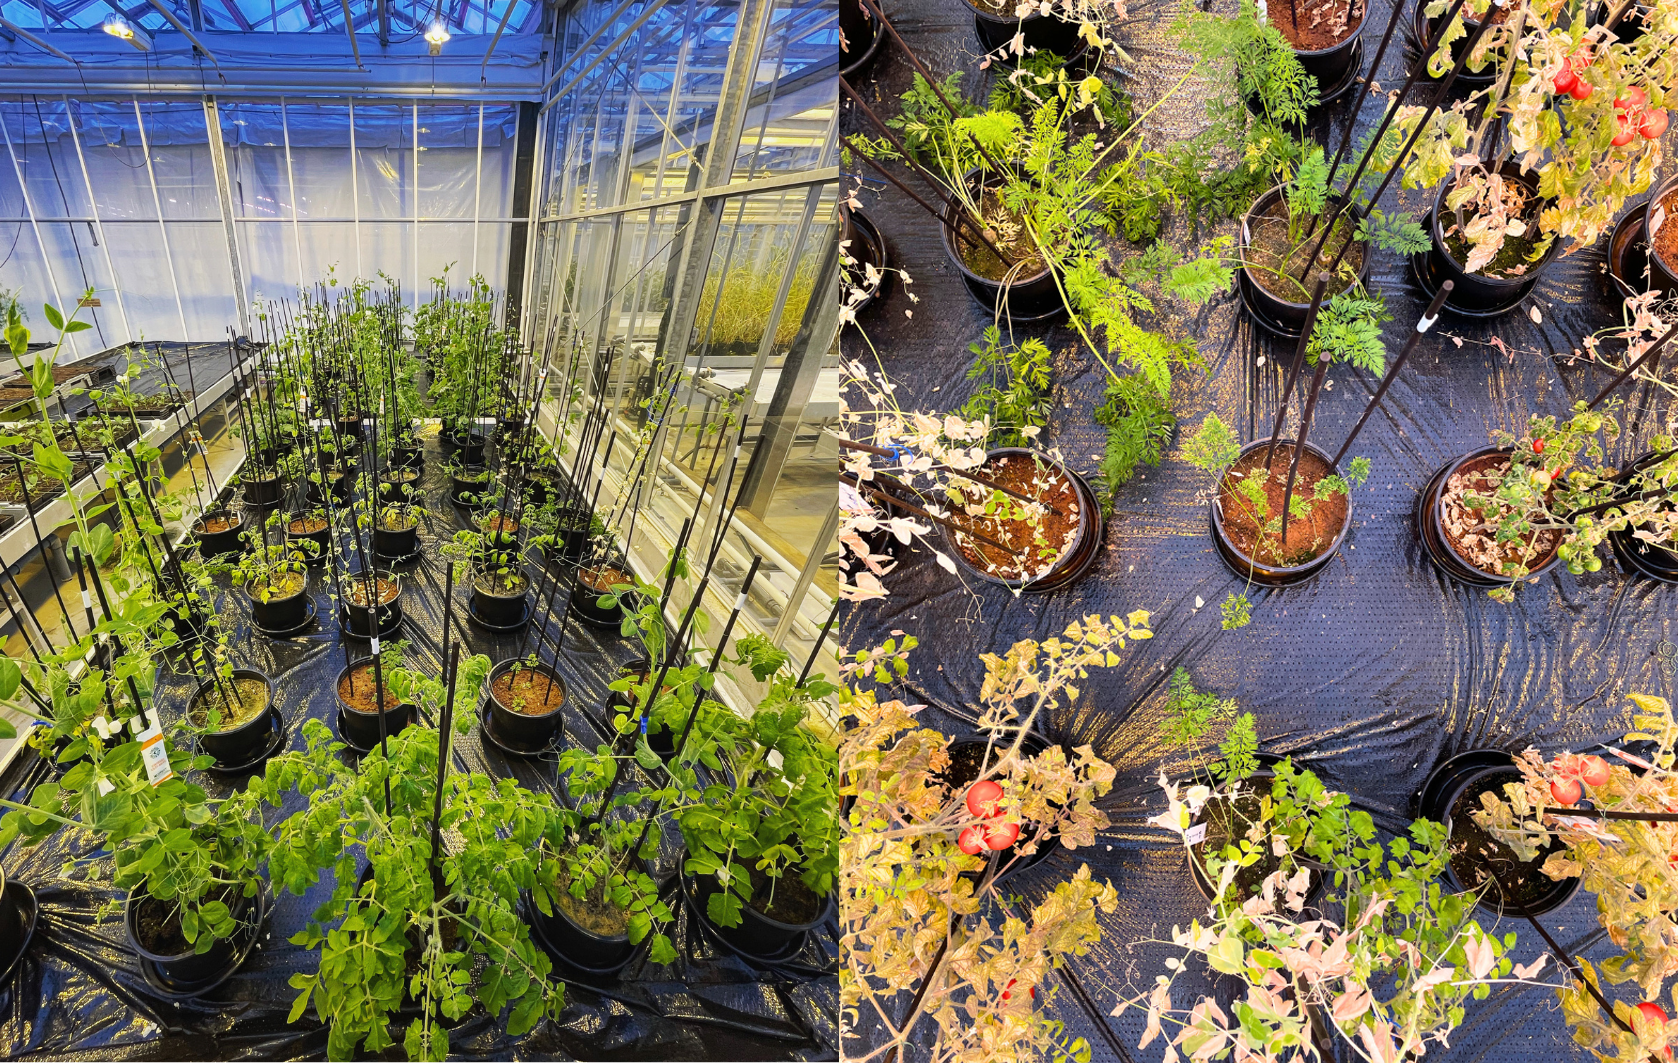 Pots of various plants lined up in the greenhouse (left). Pots with Mars, sand, and Earth soil (right)